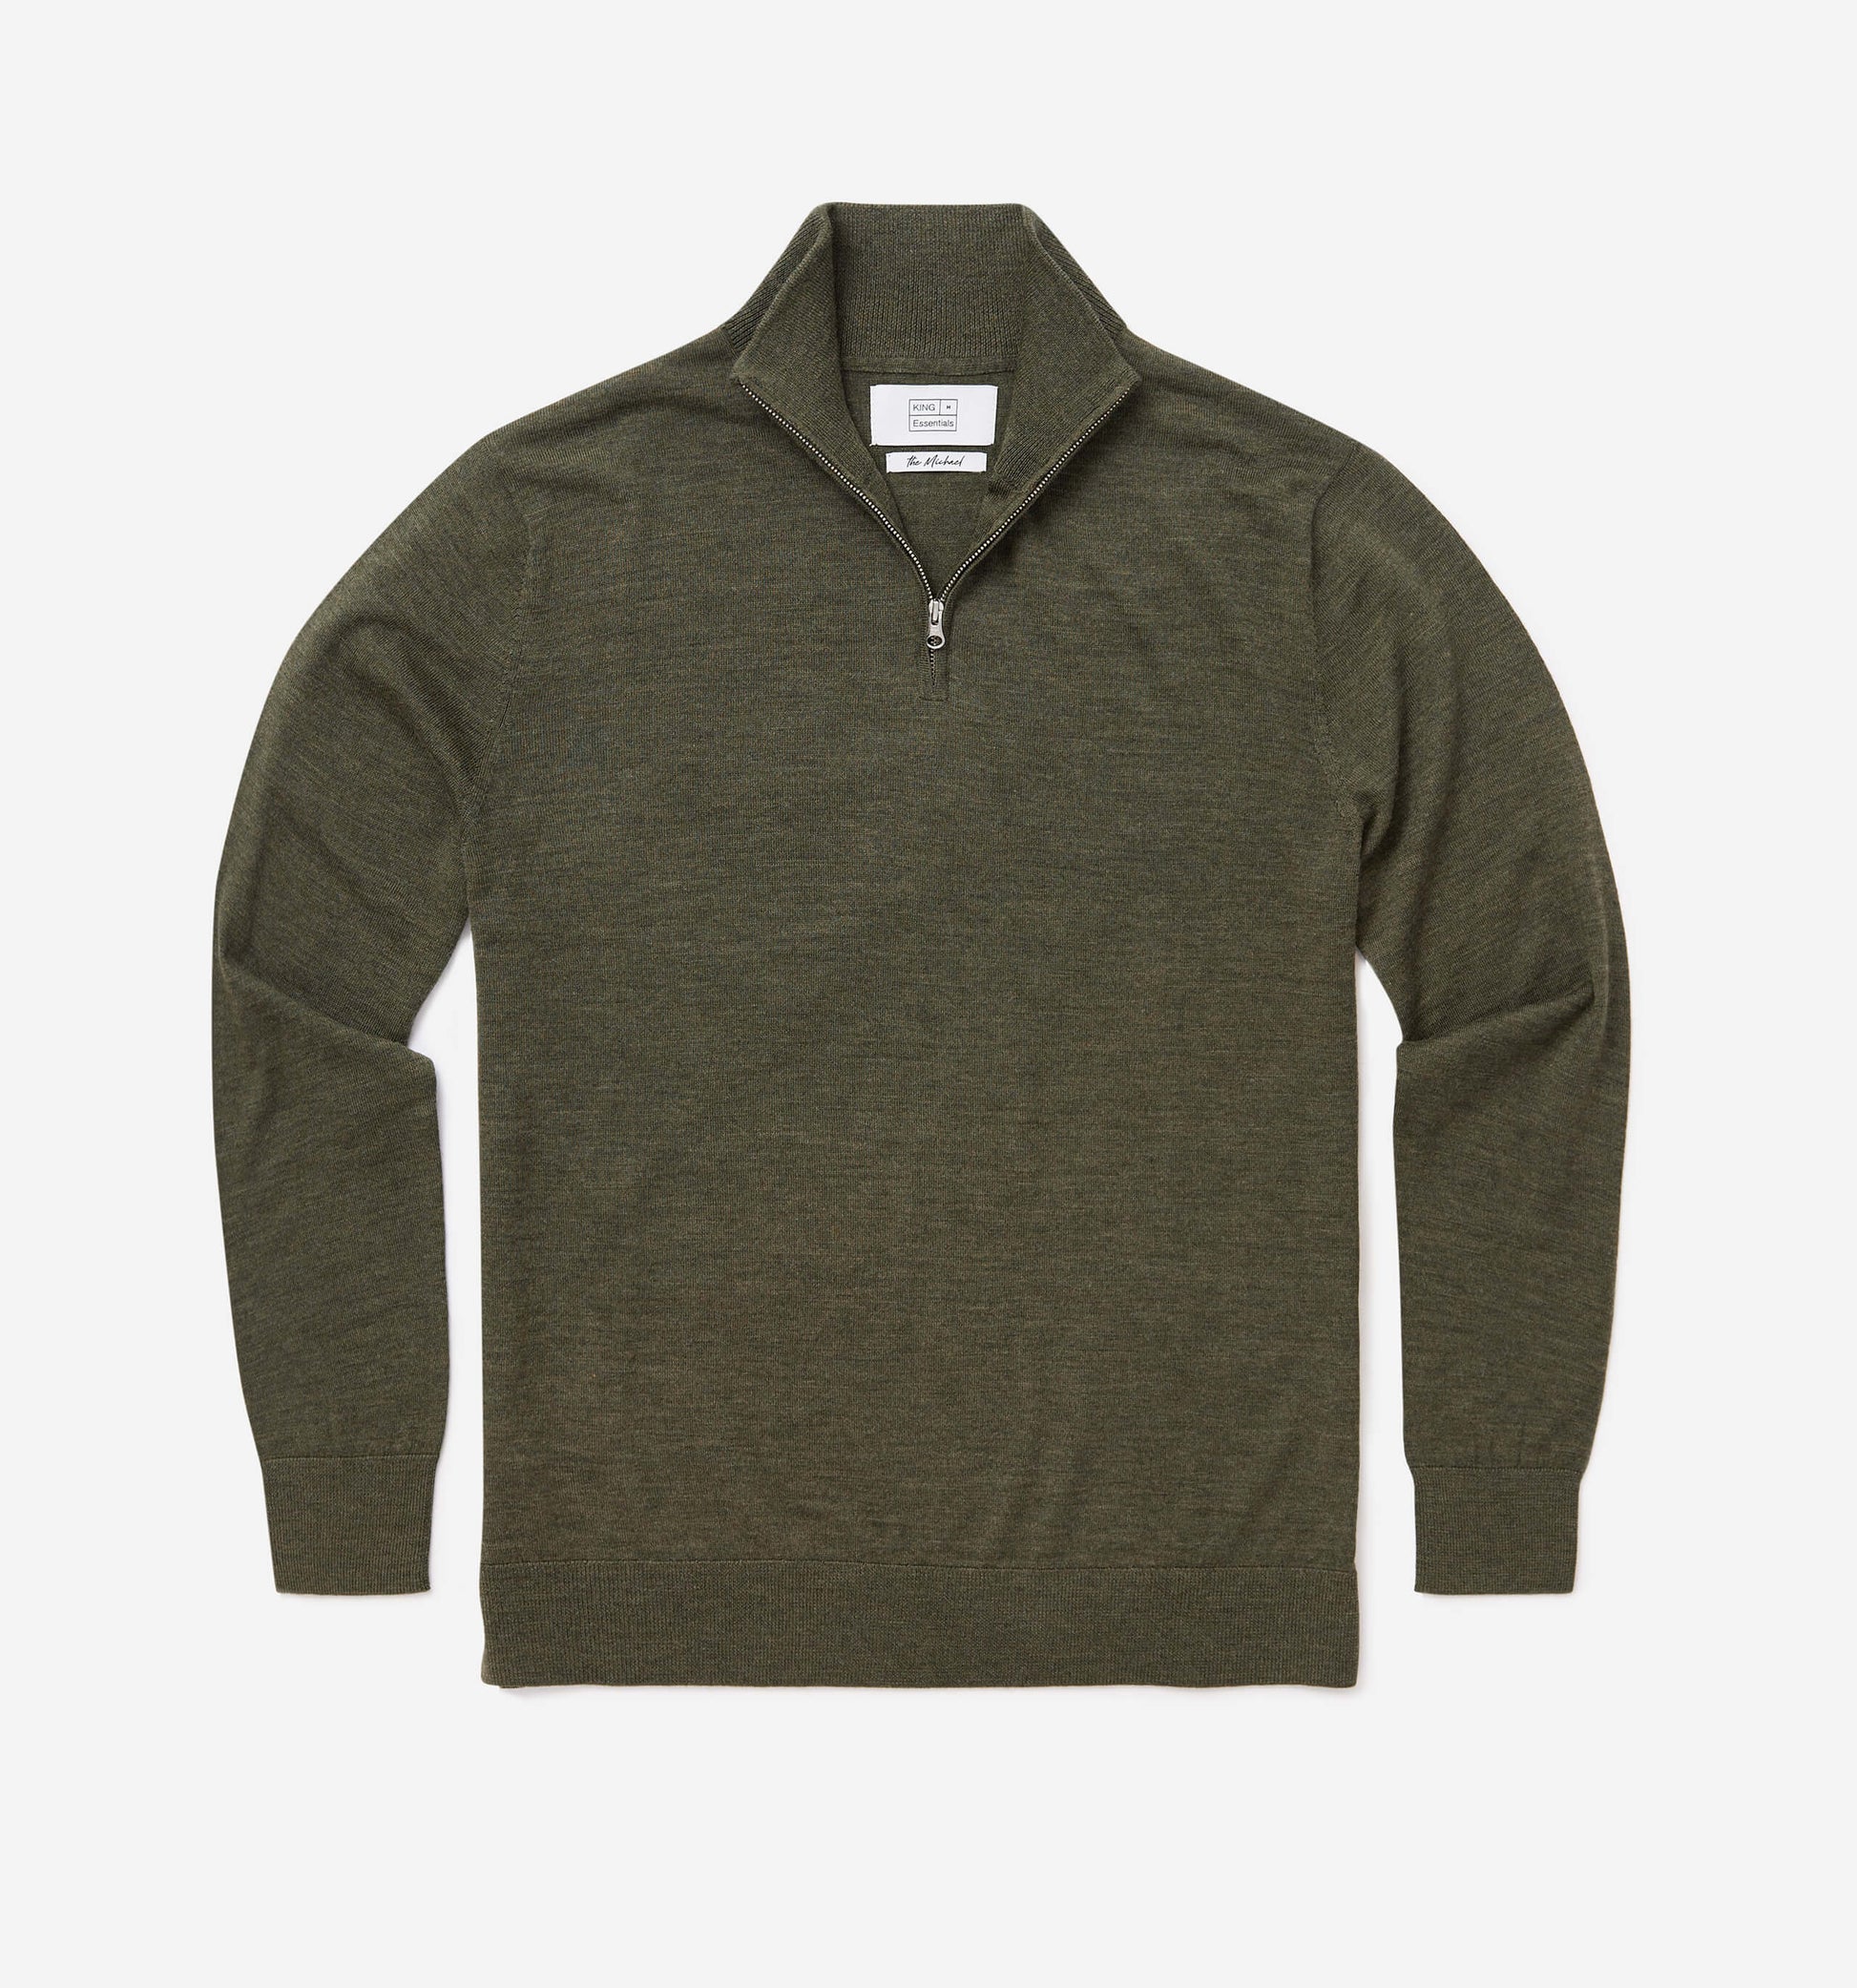 The Michael - Merino Wool Zip Mock In Army From King Essentials